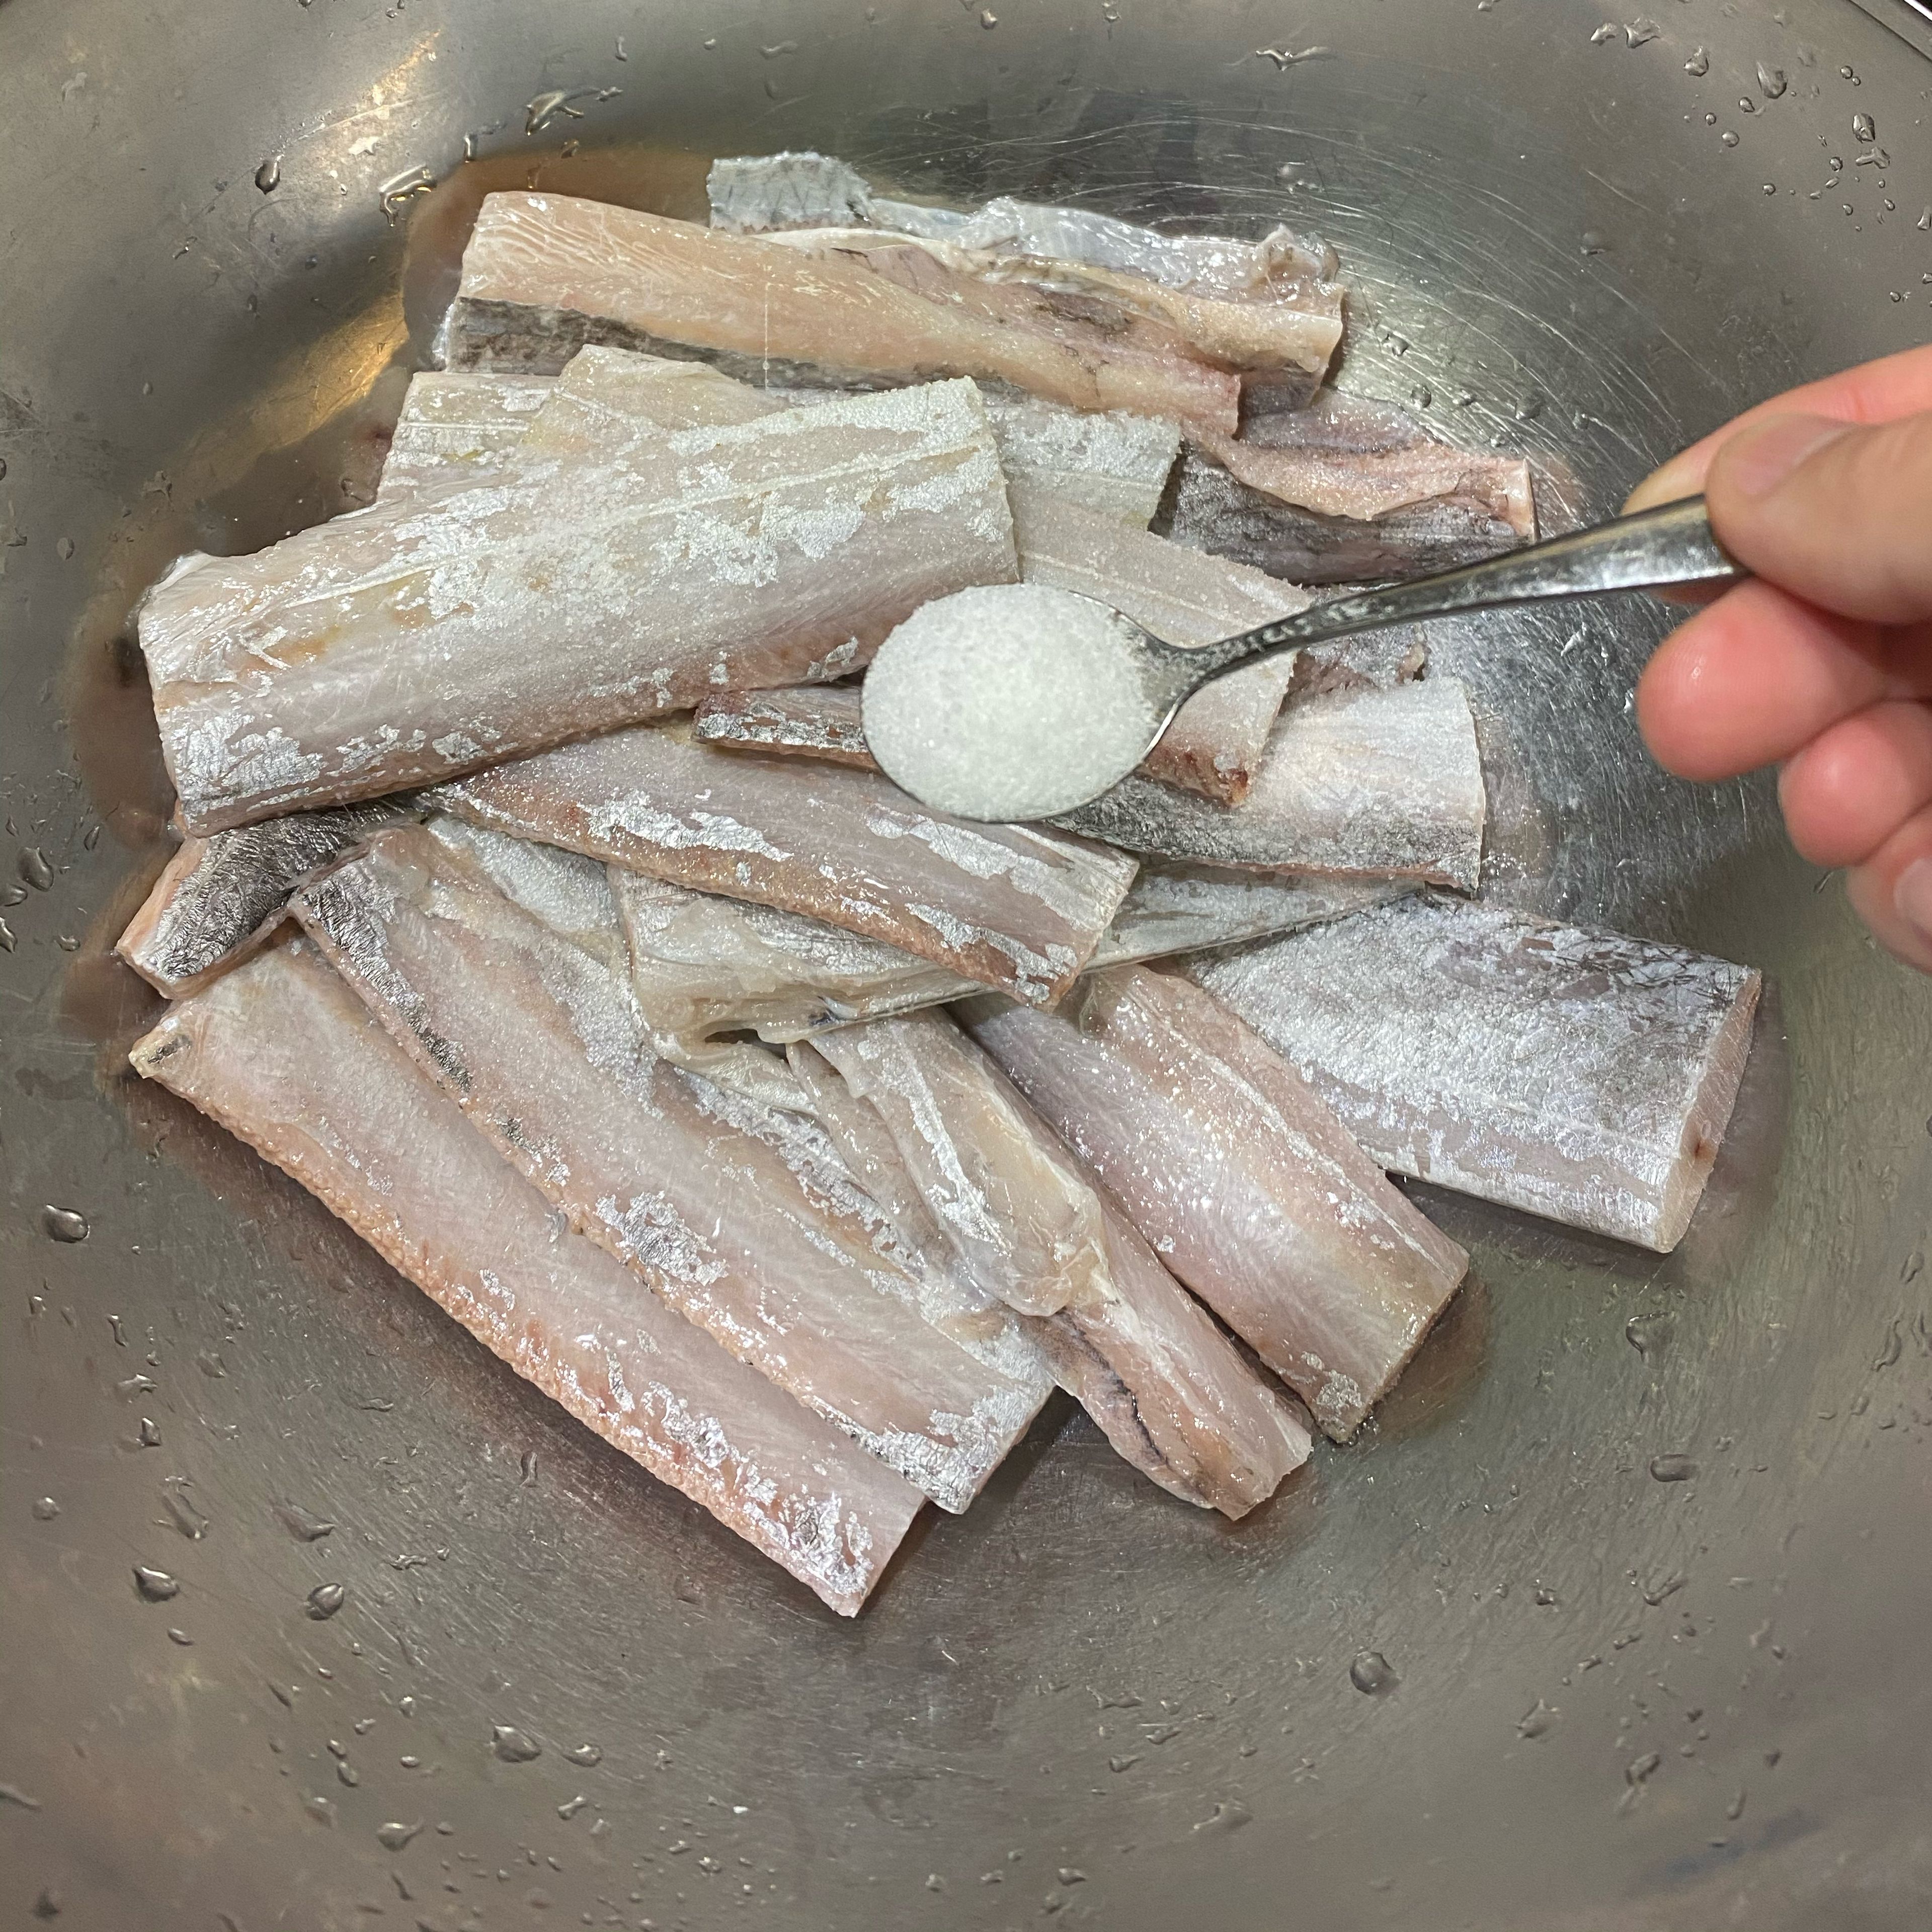 Pat fish dry and add salt, use your hands to rub and distribute the salt.